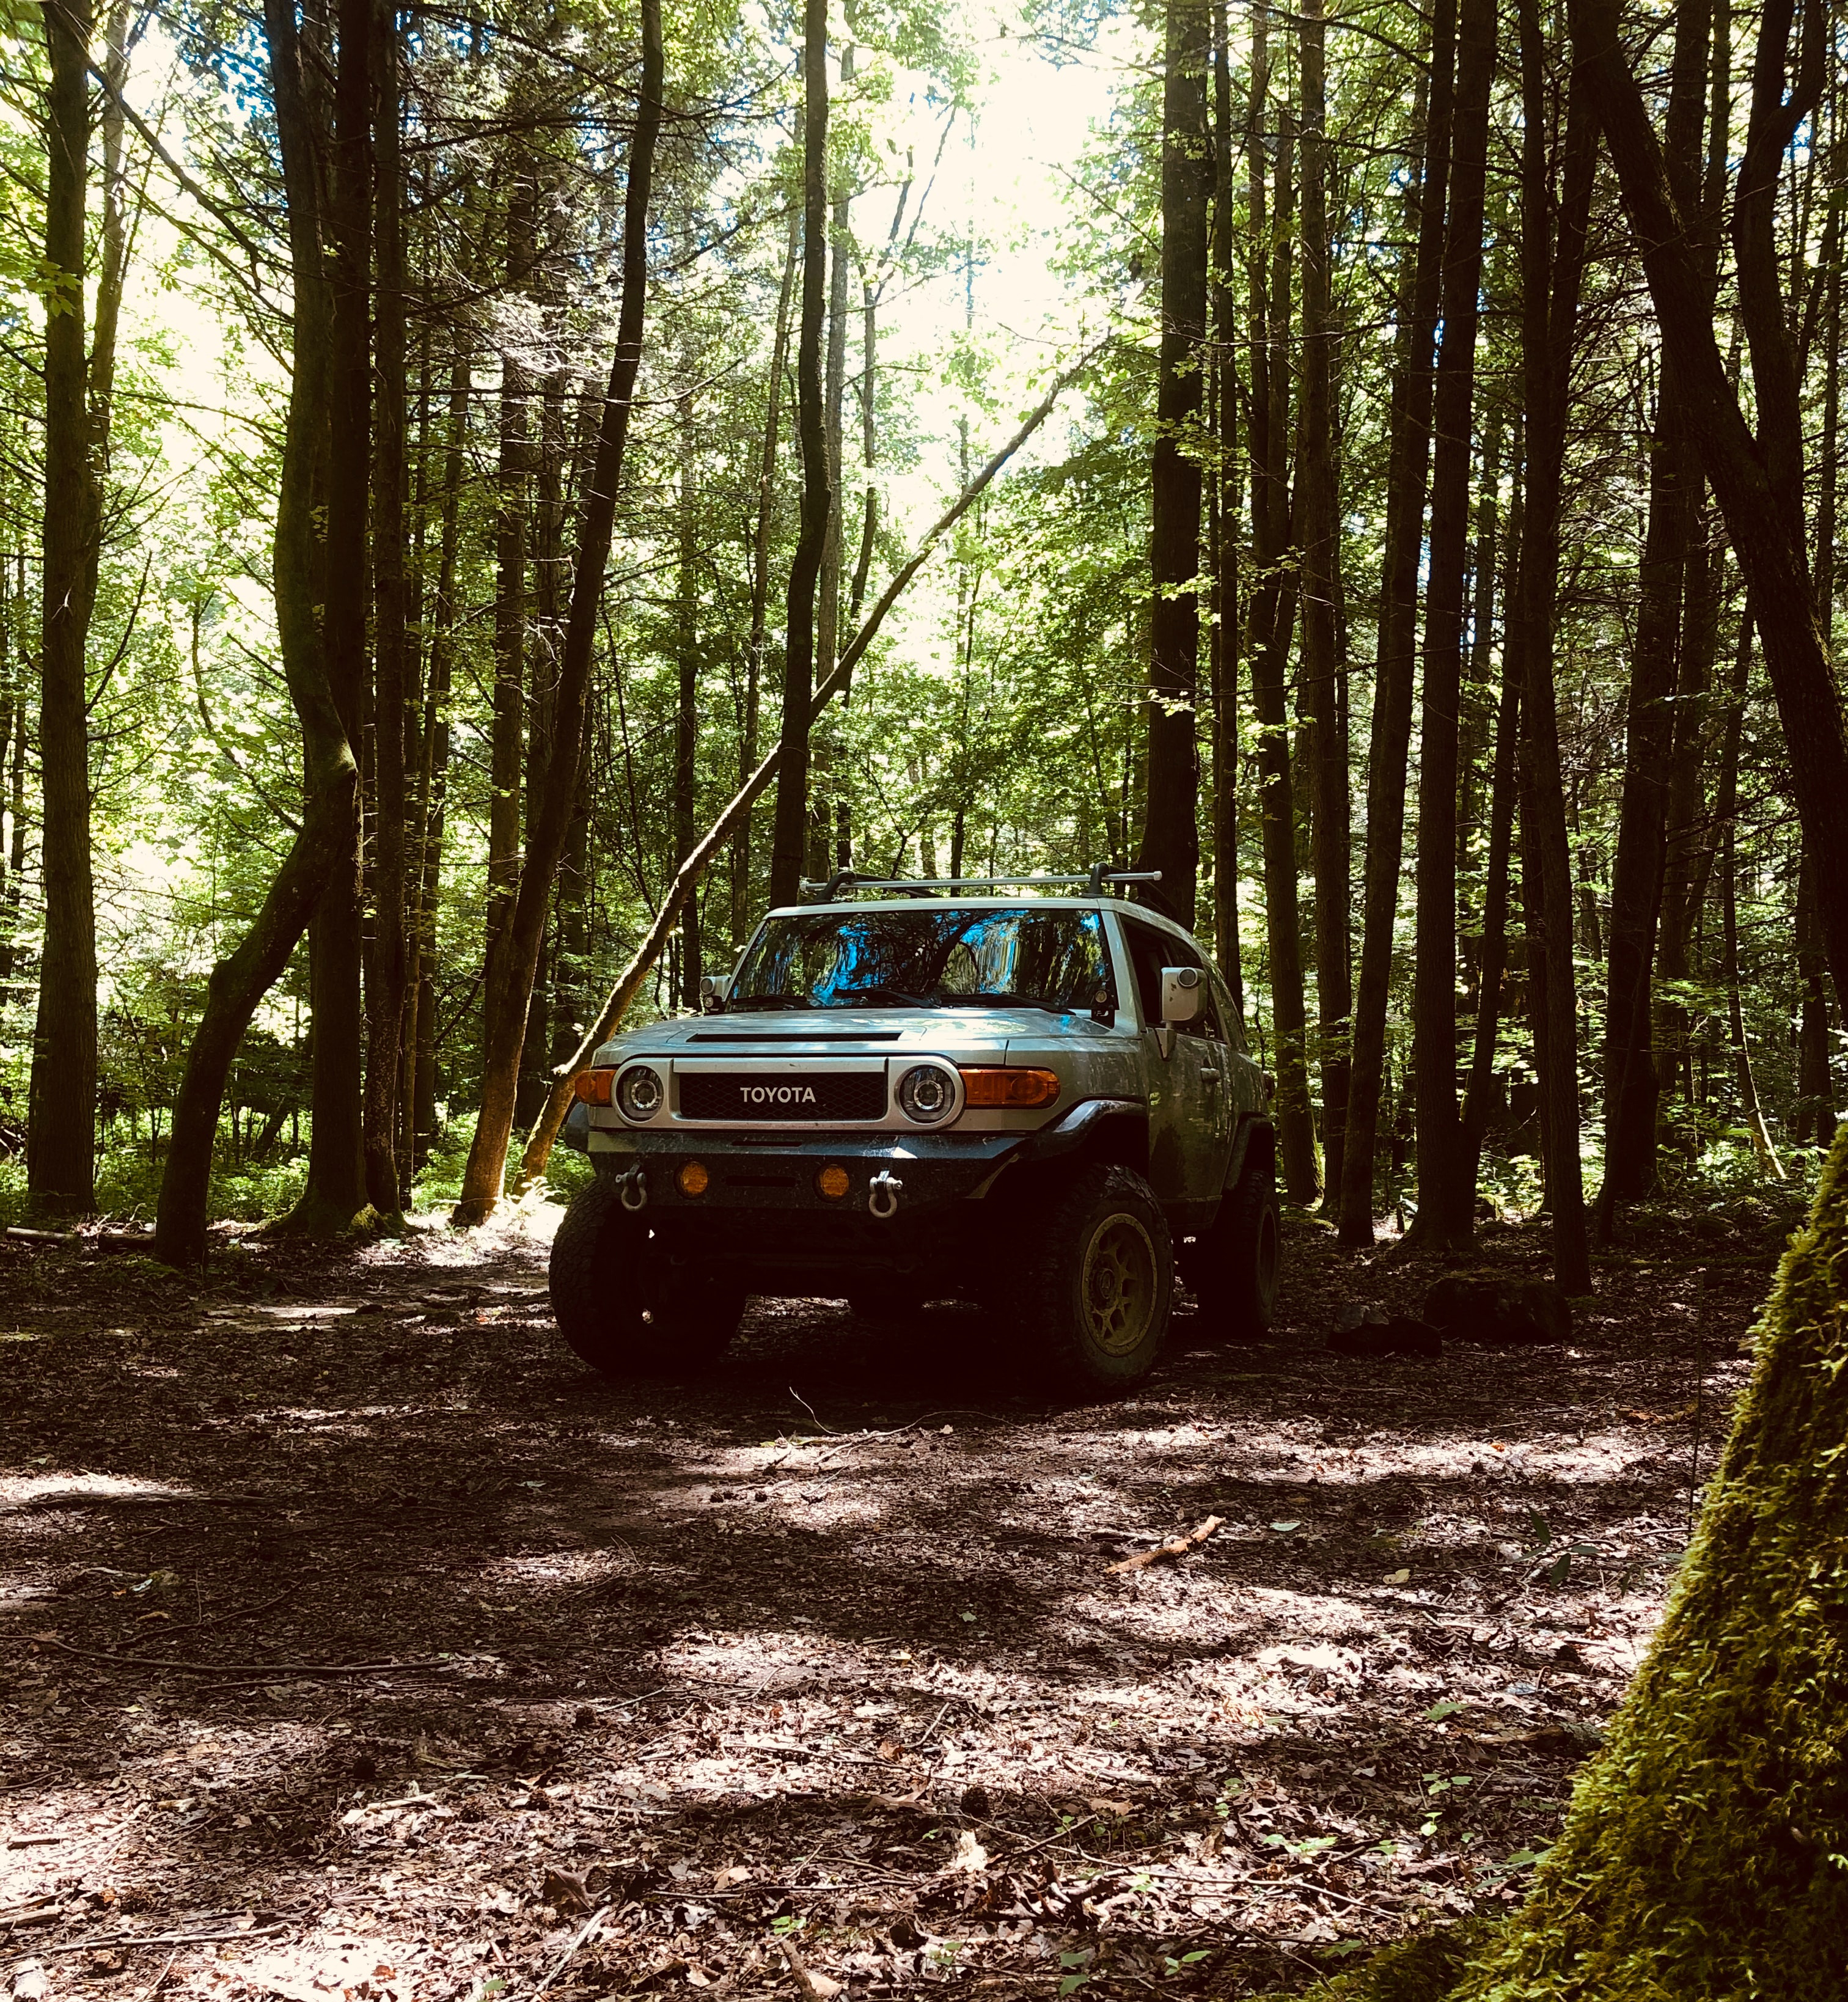 toyota, jeep, cars, forest, suv, front view Full HD